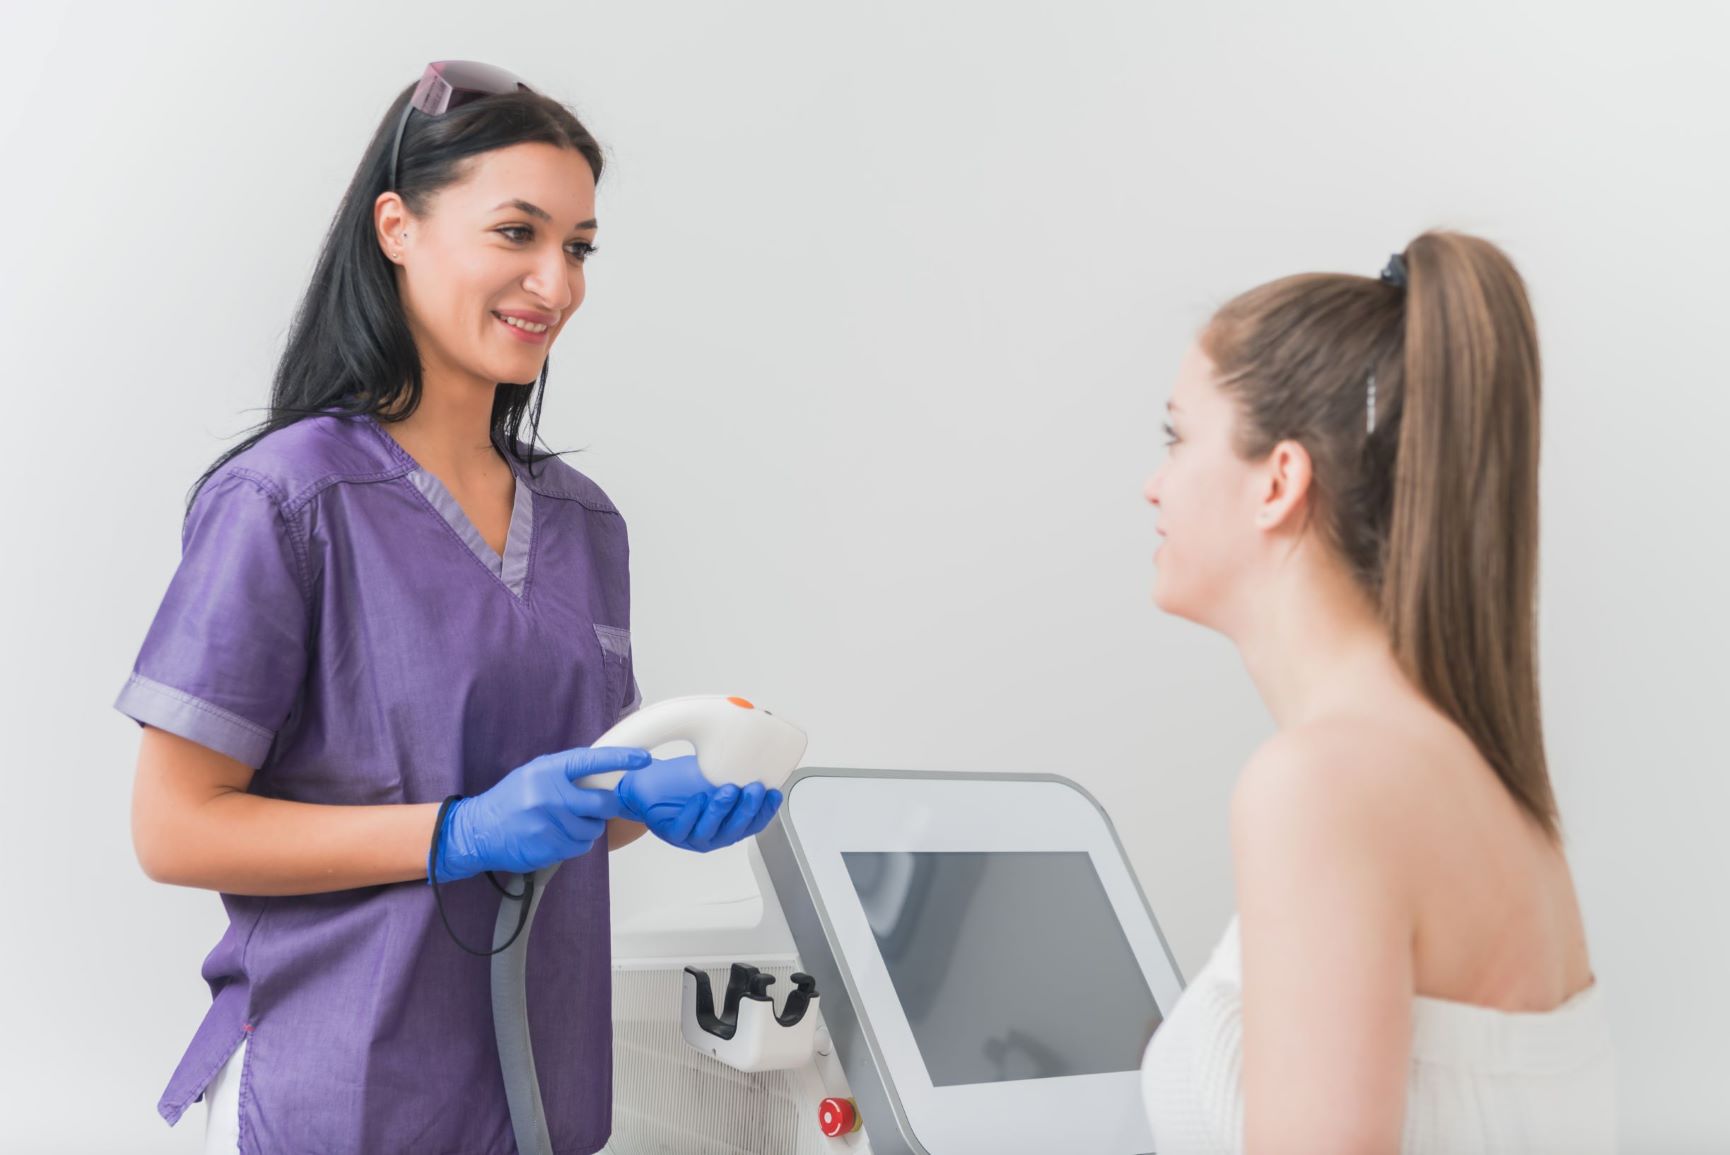 laser hair removal technician performing consultation to assess patient needs